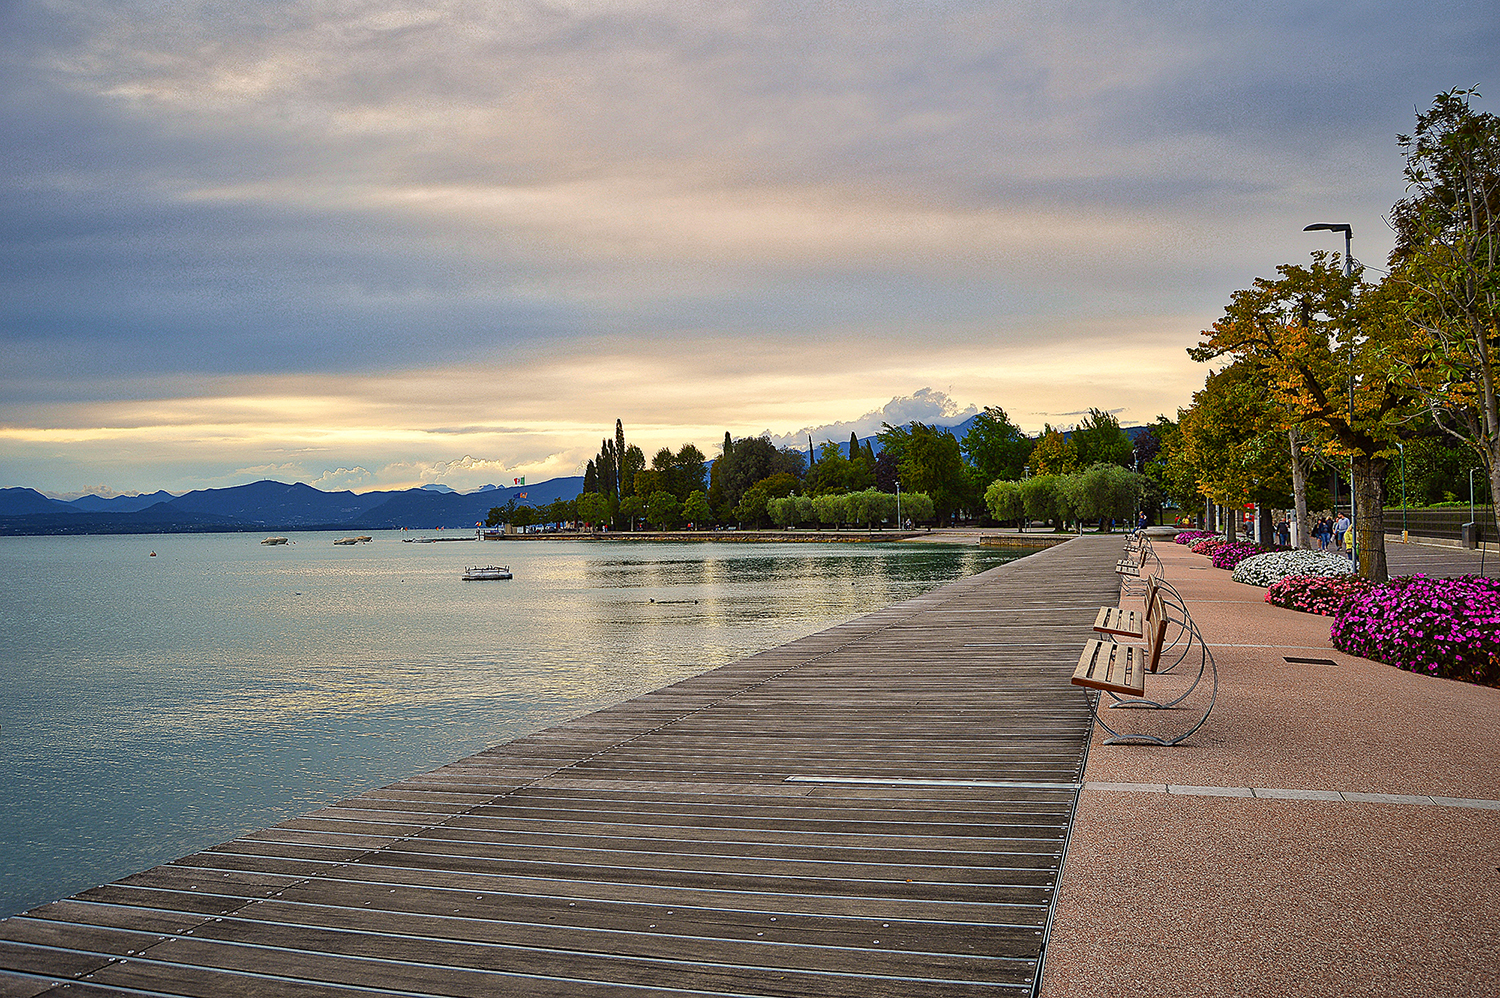 beautiful promenade pier of Bardolino, lake Garda. Landscape with benches, flowers, trees, water and dramatic evening sky